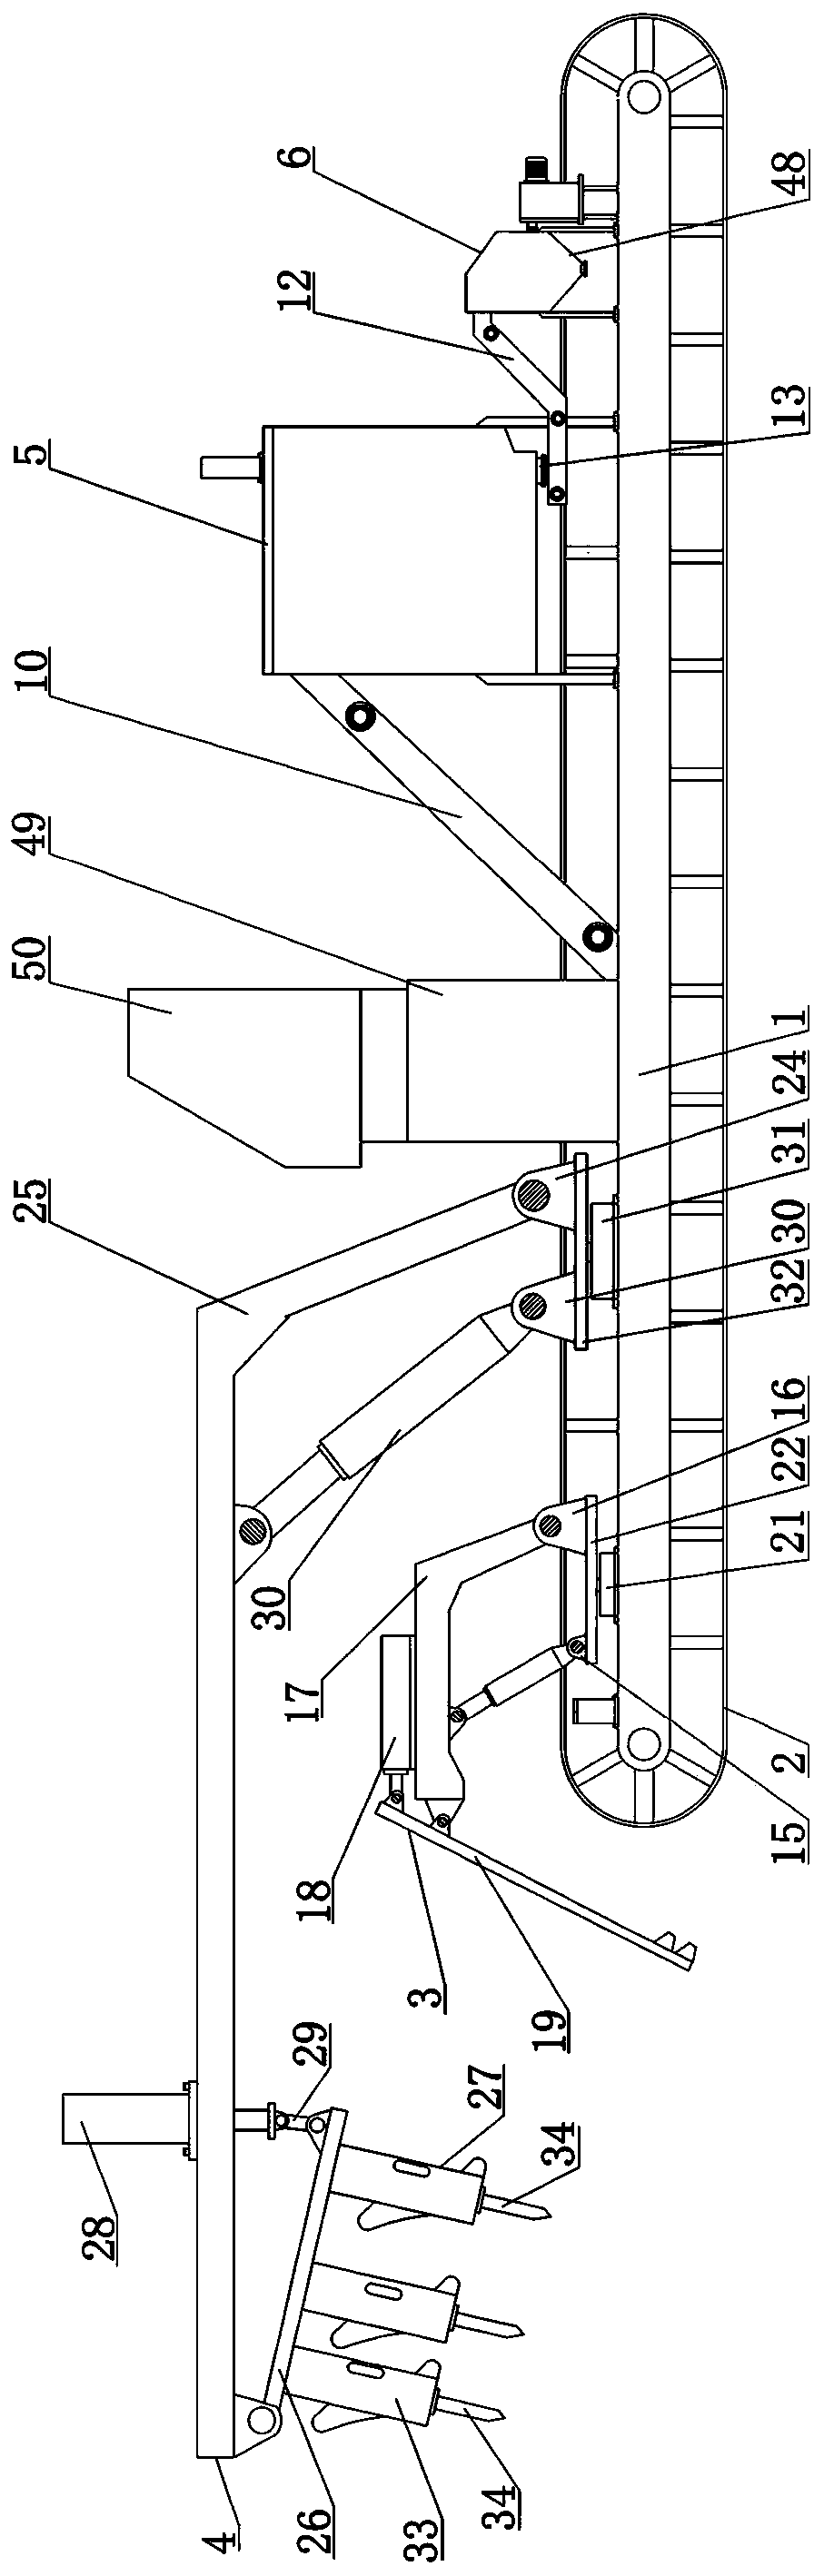 Ore mining and crushing integrated efficient-mining device and method